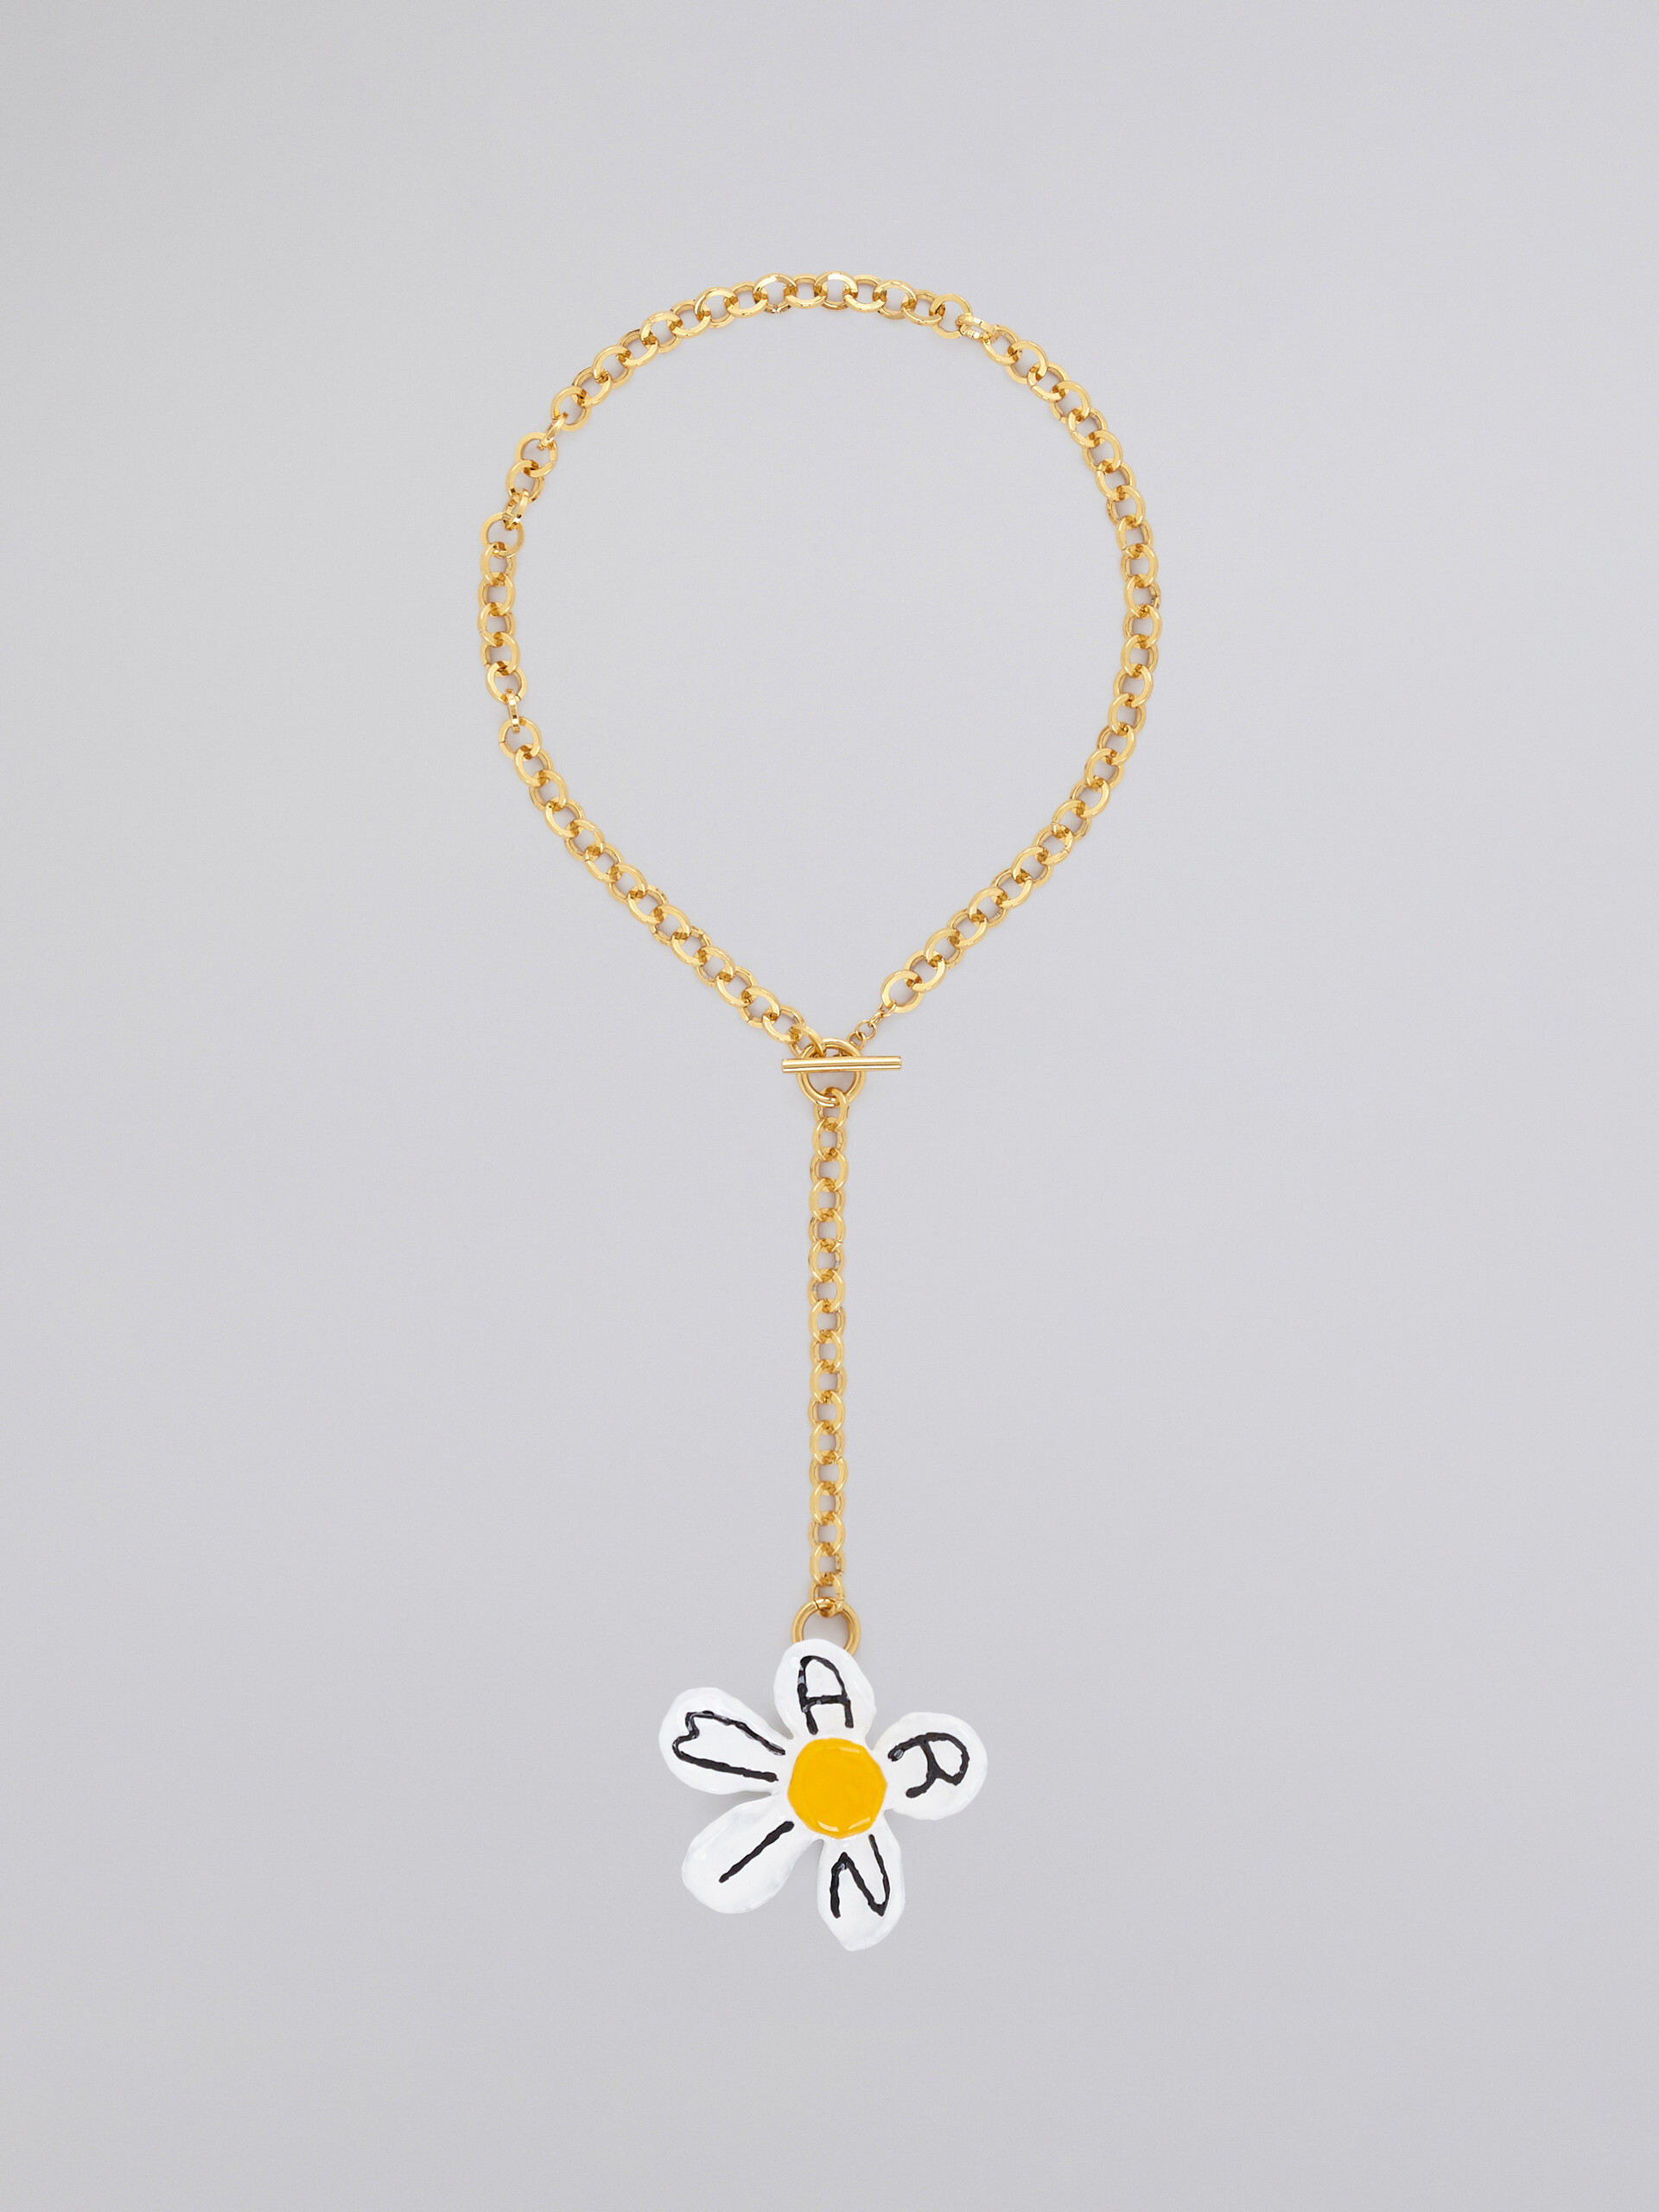 DAISY necklace - Necklaces - Image 3